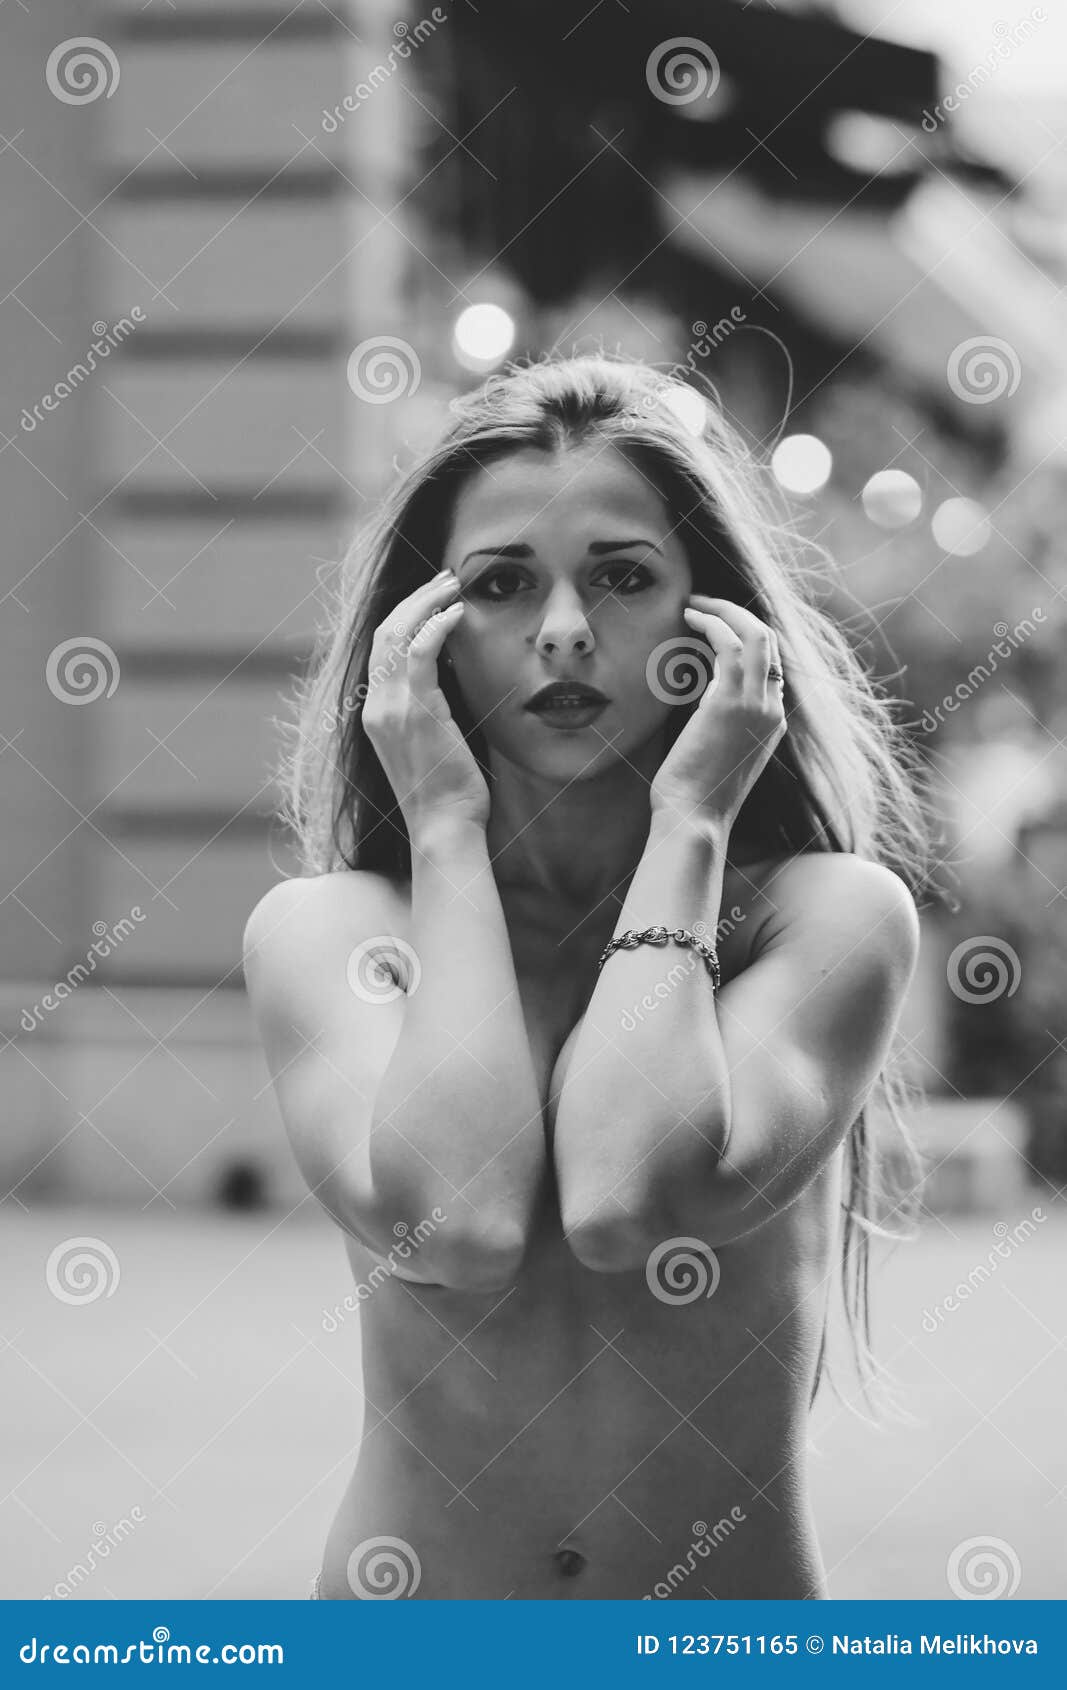 Hot Redhair Woman In The City. Half Naked Girl. Black And White.